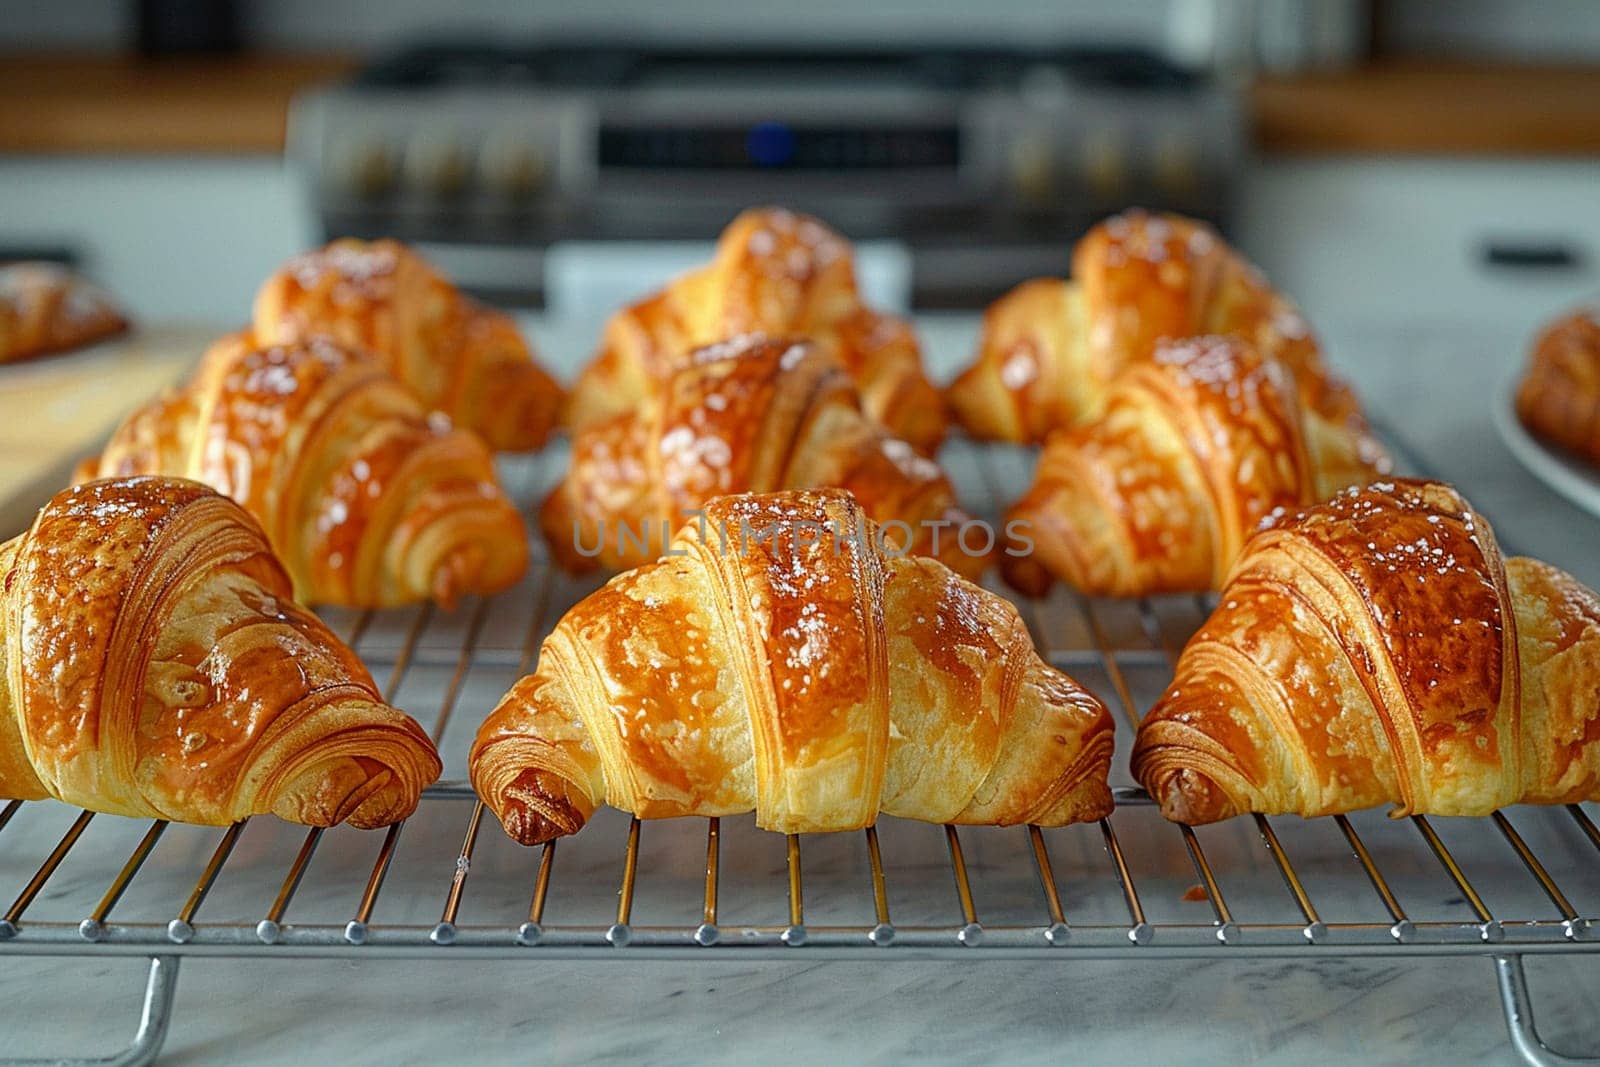 Freshly baked croissants on cooling rack, evoking aroma and breakfast delights.